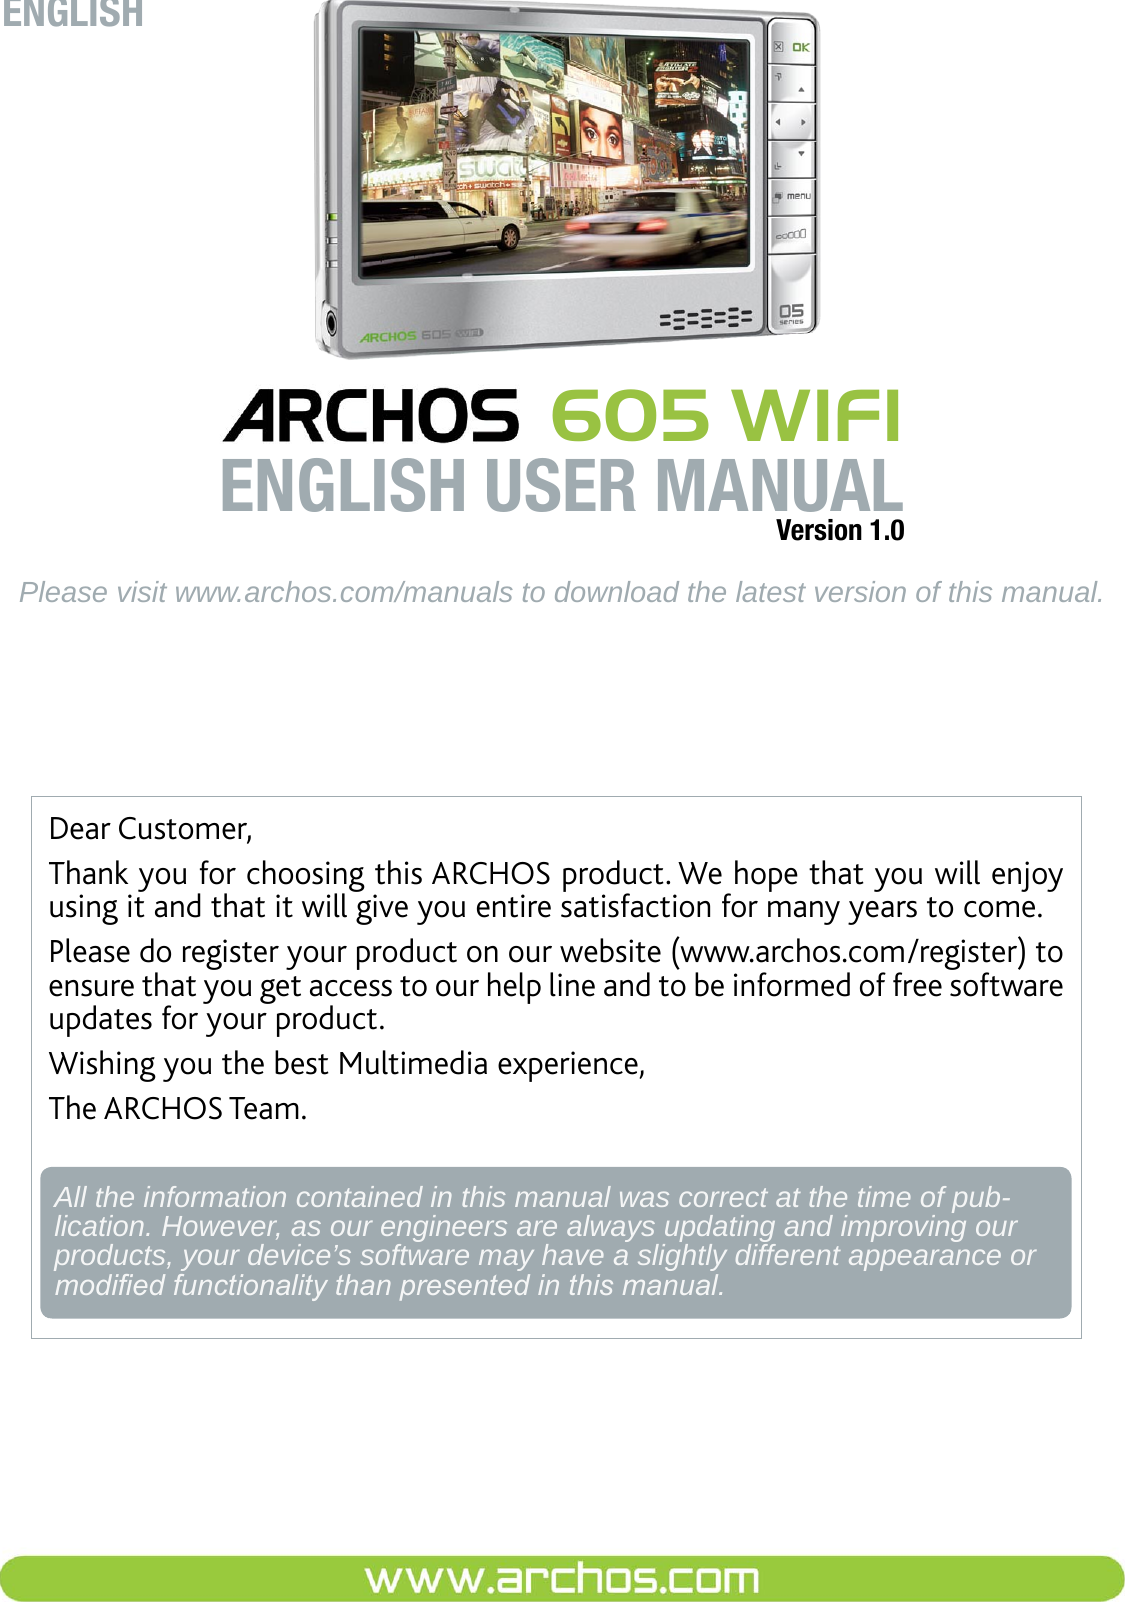 Dear Customer,Thank you for choosing this ARCHOS product. We hope that you will enjoy using it and that it will give you entire satisfaction for many years to come.Please do register your product on our website (www.archos.com/register) to ensure that you get access to our help line and to be informed of free software updates for your product.Wishing you the best Multimedia experience,The ARCHOS Team.All the information contained in this manual was correct at the time of pub-lication. However, as our engineers are always updating and improving our products, your device’s software may have a slightly different appearance or modied functionality than presented in this manual.ENGLISHPlease visit www.archos.com/manuals to download the latest version of this manual. 605 WIFIENGLISH USER MANUALVersion 1.0